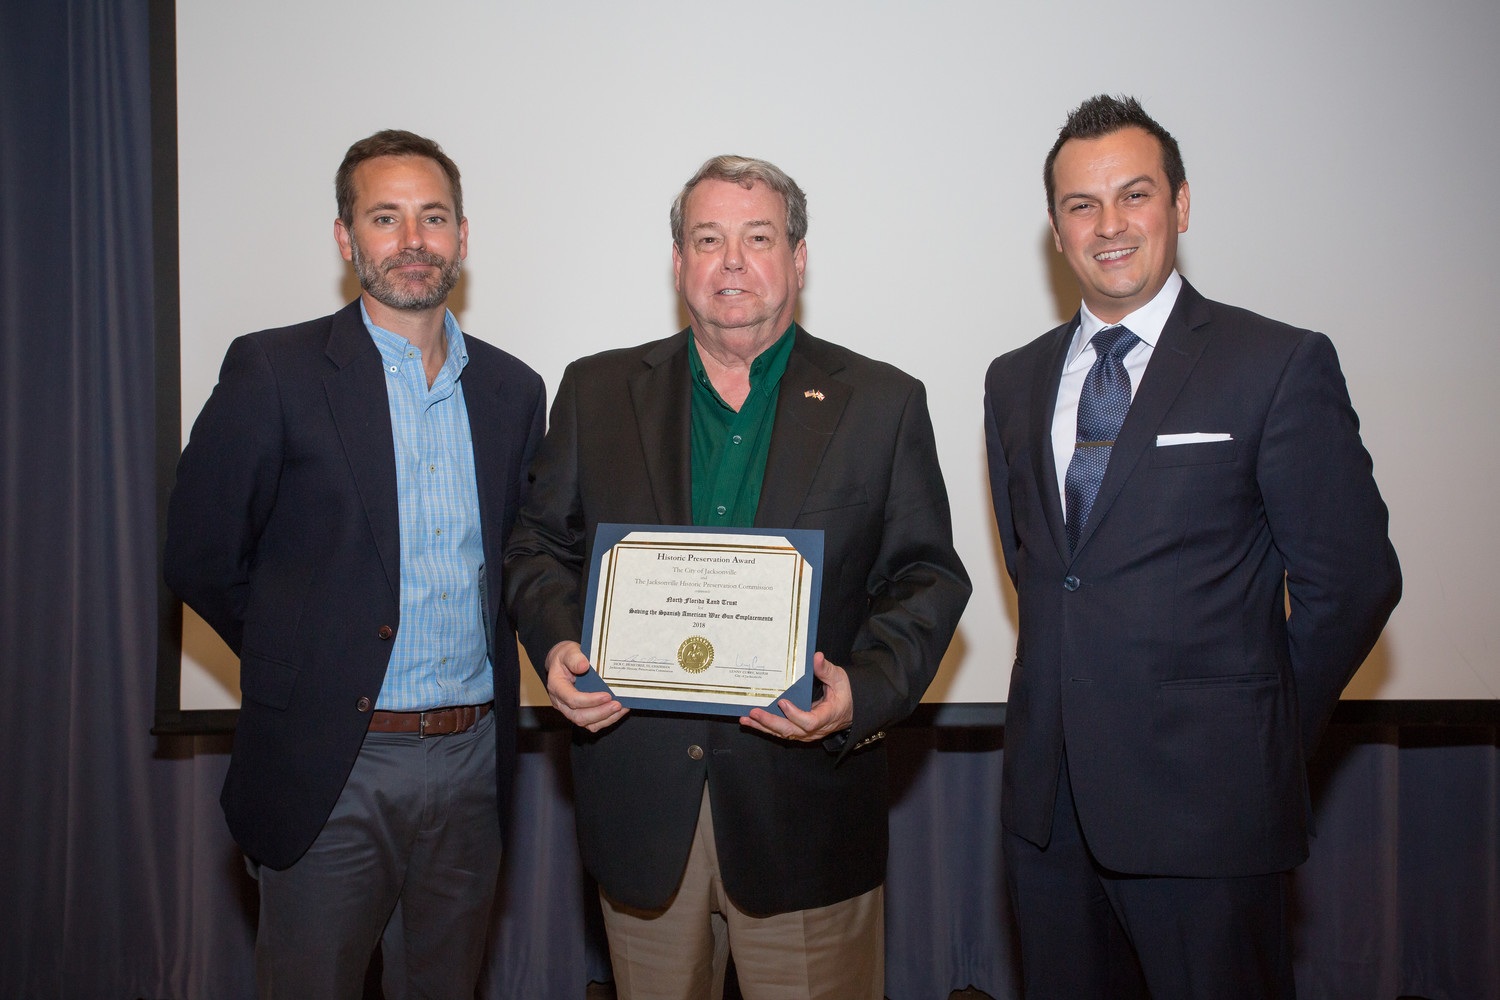 North Florida Land Trust President and Ponte Vedra resident Jim McCarthy (center) is presented with the 2018 Historic Preservation Award by Jacksonville Historic Preservation Commission Vice Chairman Ryan Davis (from left) and Commissioner Andres Lopera.